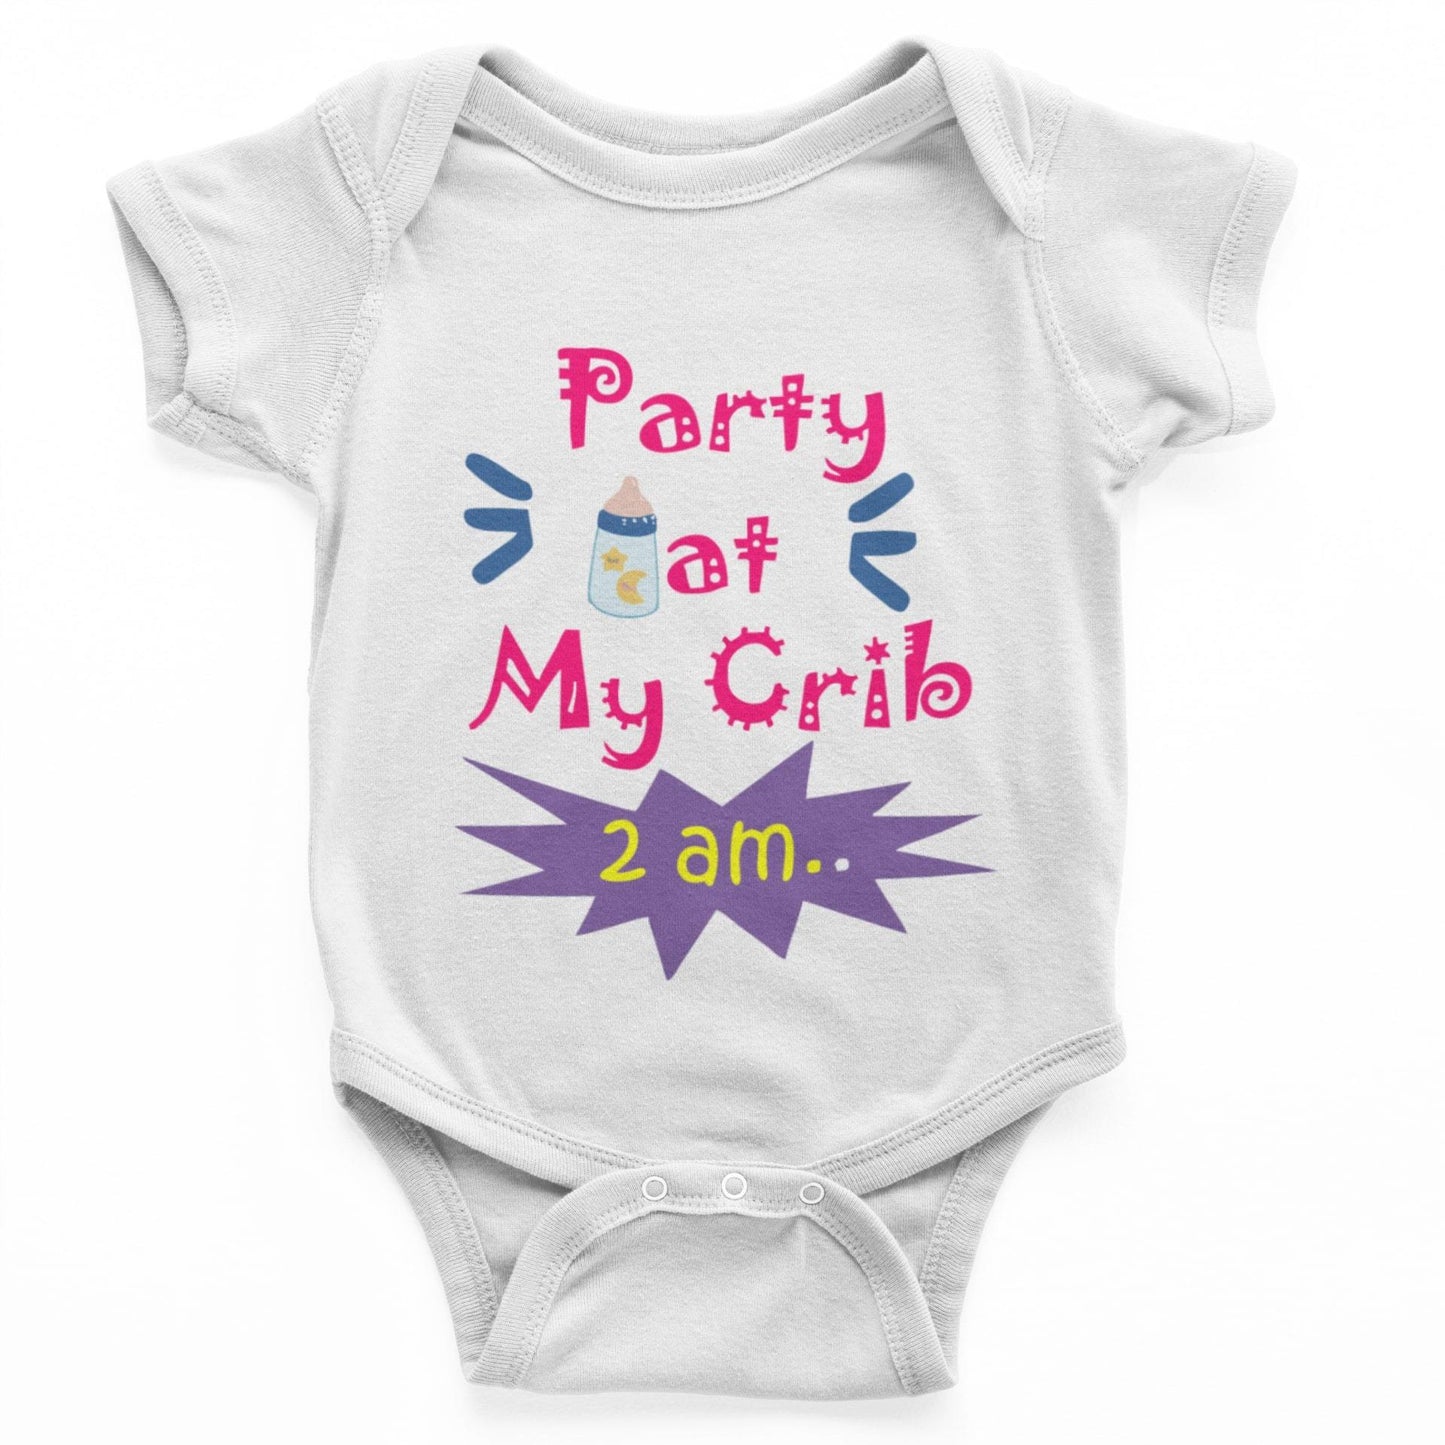 thelegalgang,Party at my crib Rompers for Babies,.